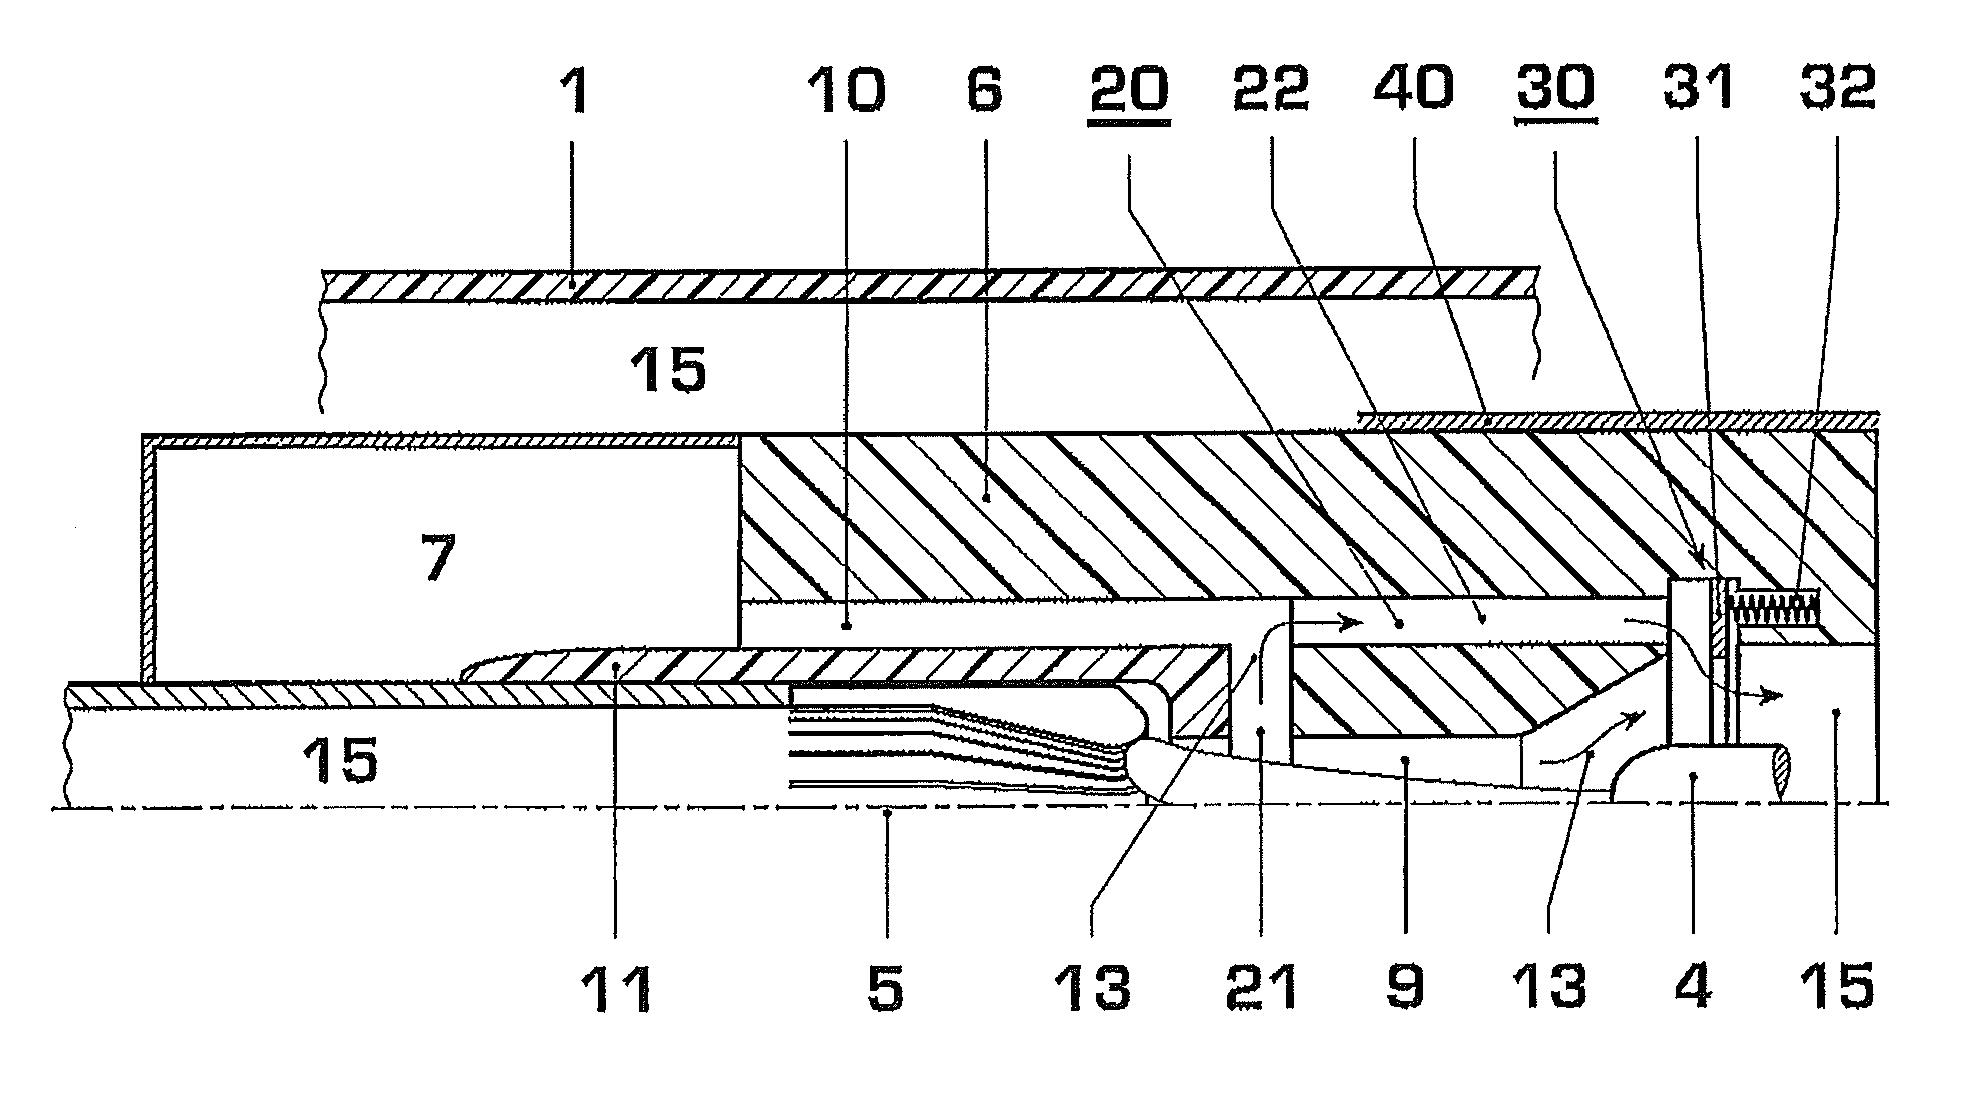 Gas-insulated high-voltage circuit breaker with a relief duct which is controlled by an overflow valve